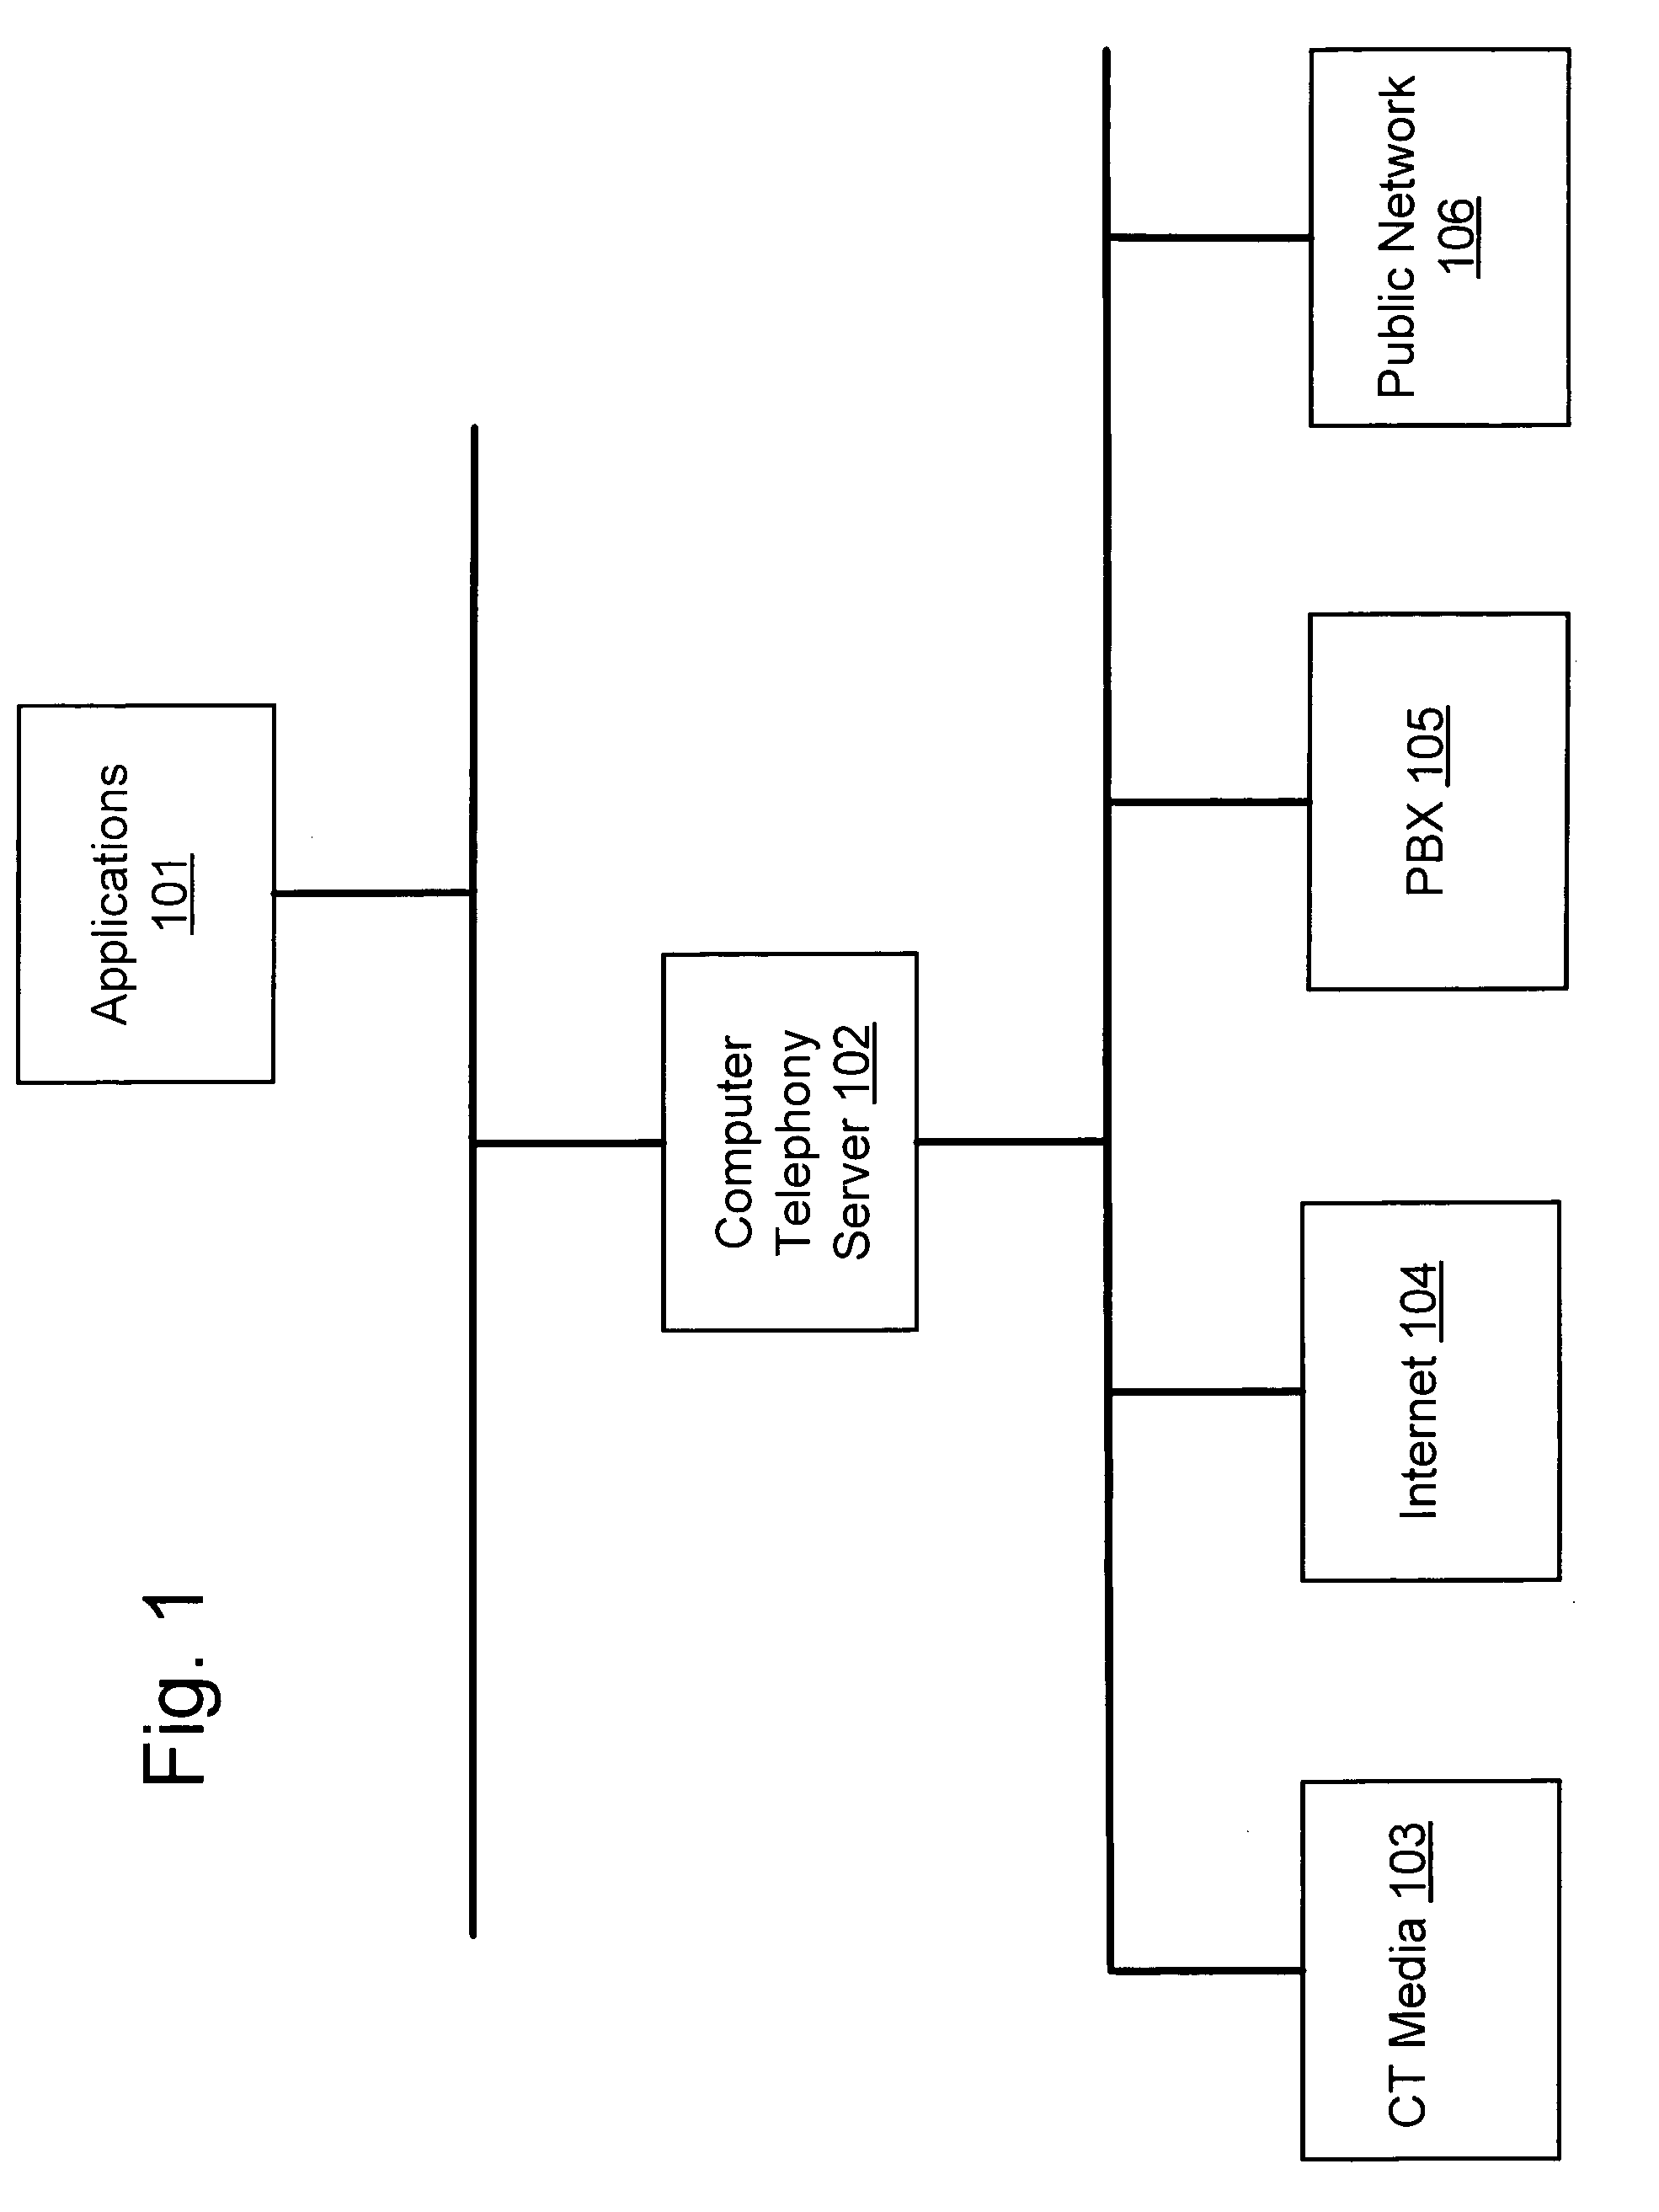 Computer telephony server with improved flexibility